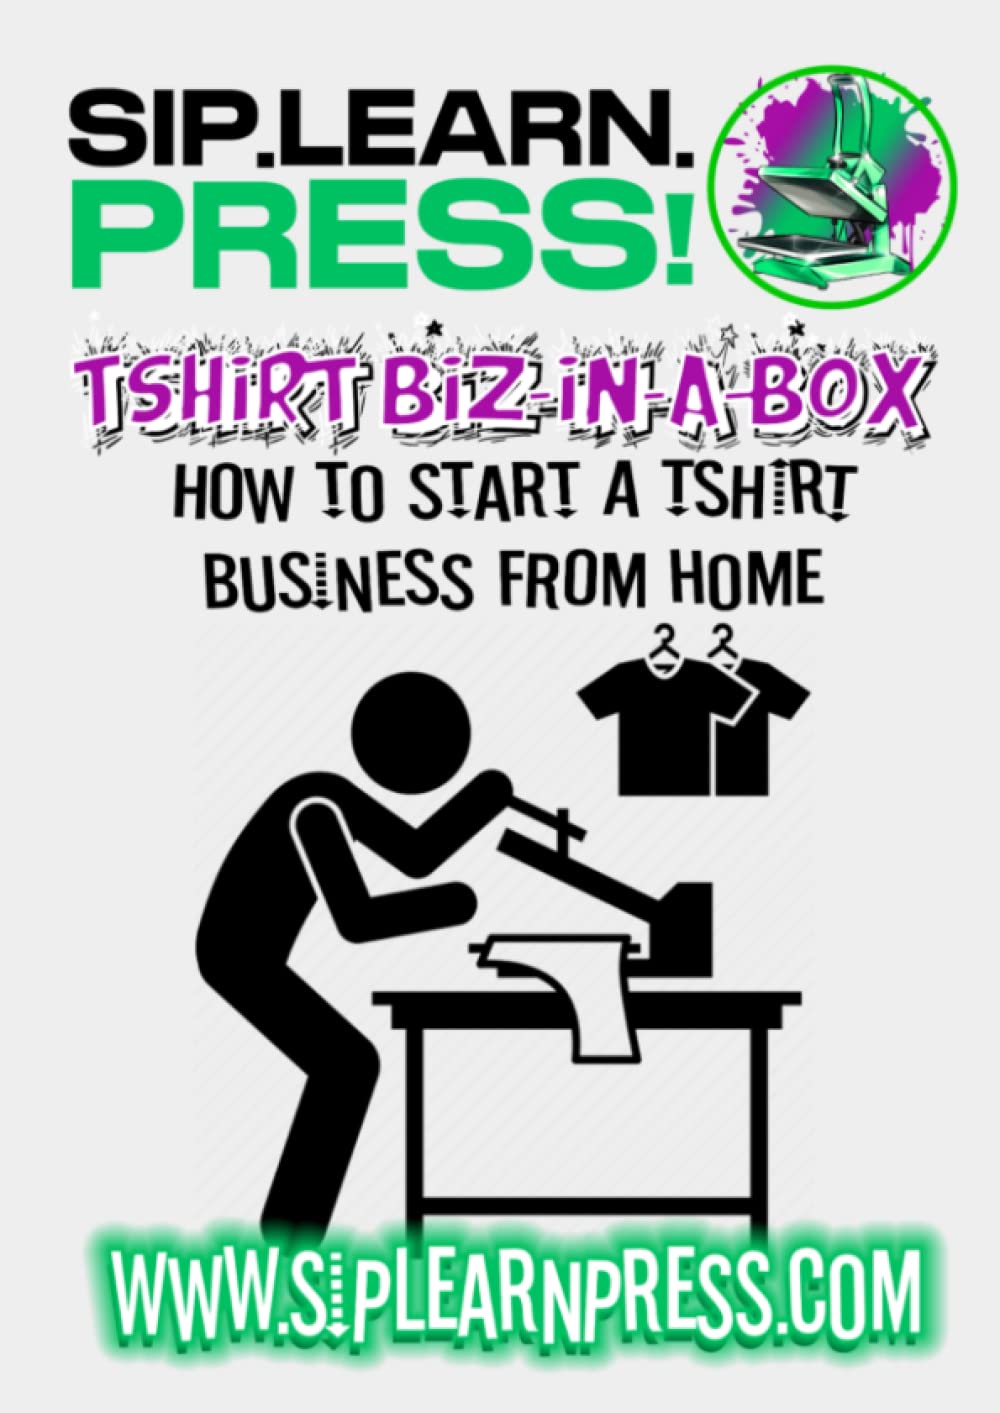 How to Start a TShirt Business From Home Workbook